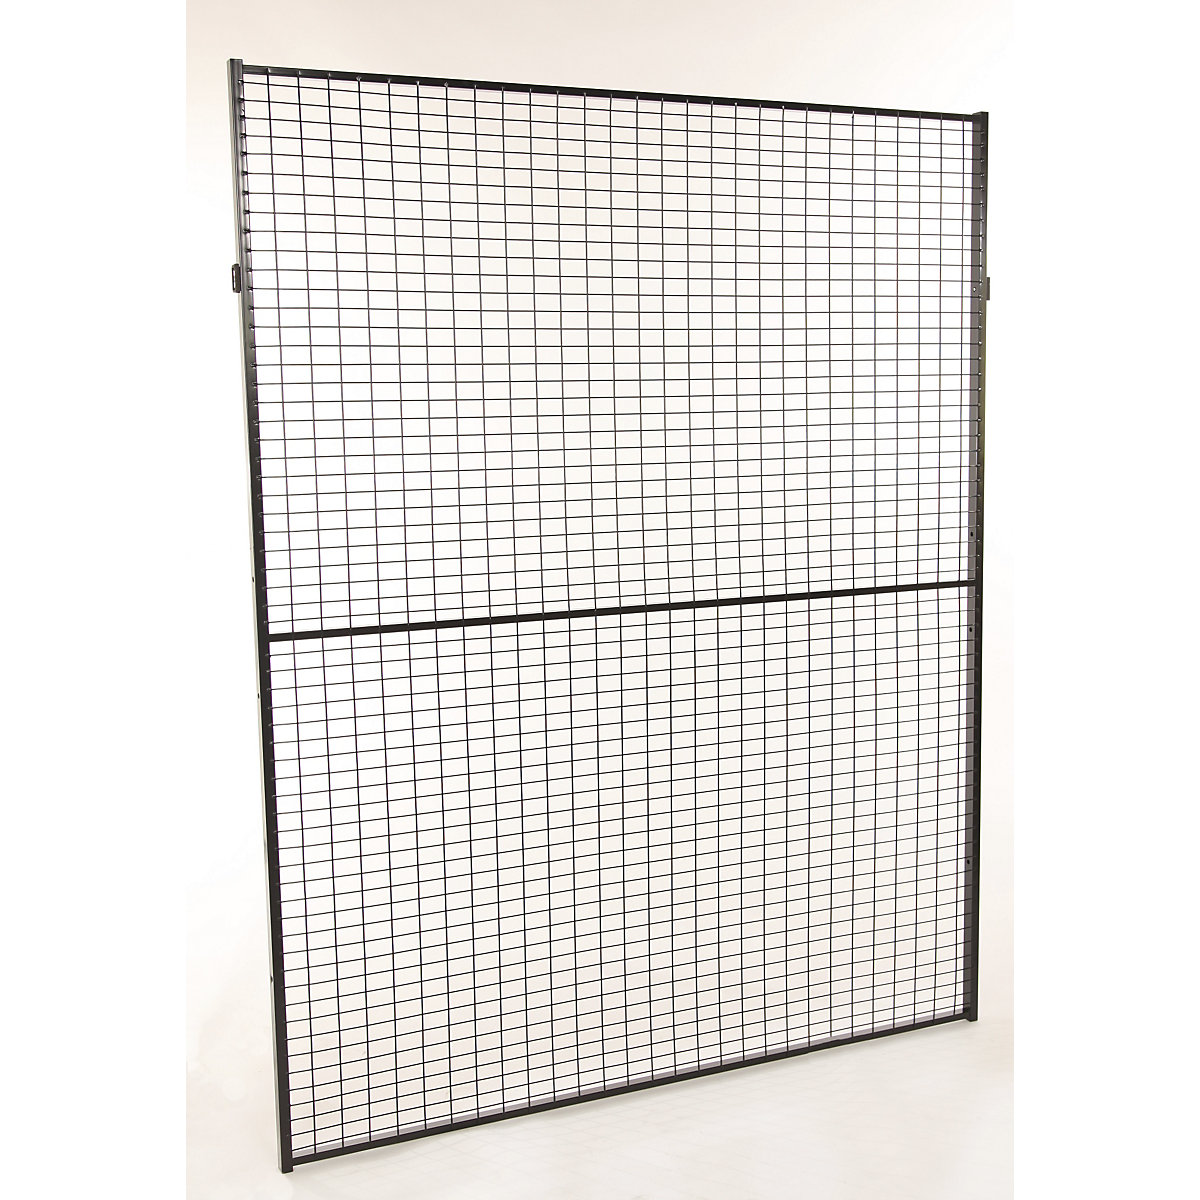 X-GUARD CLASSIC machine protective fencing, wall section – Axelent, height 2200 mm, width 1200 mm-14